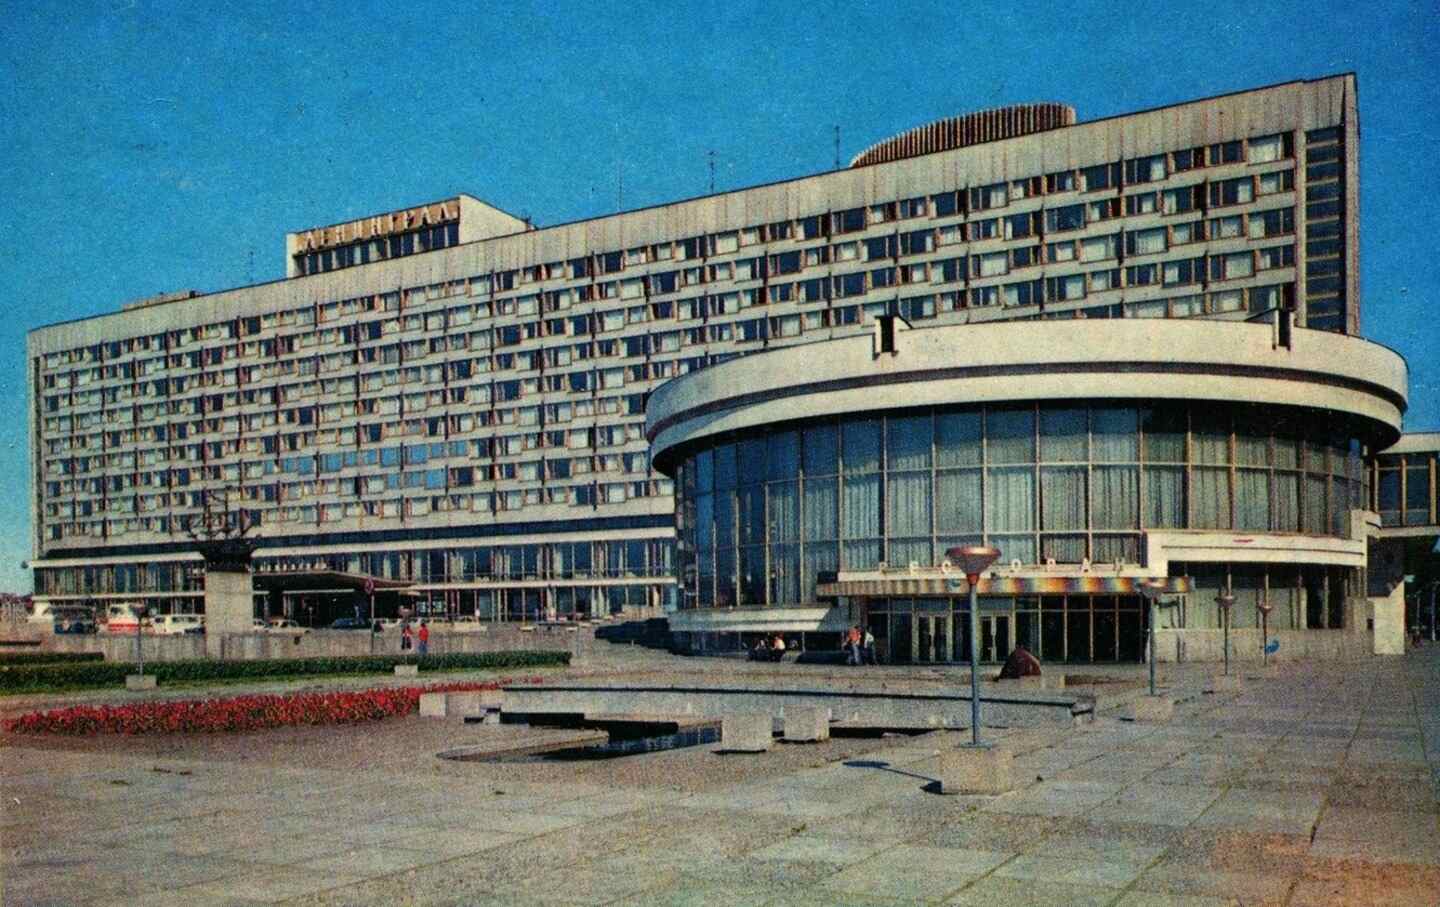 A postcard printed in the USSR shows aview of Leningrad Hotel, circa 1978.